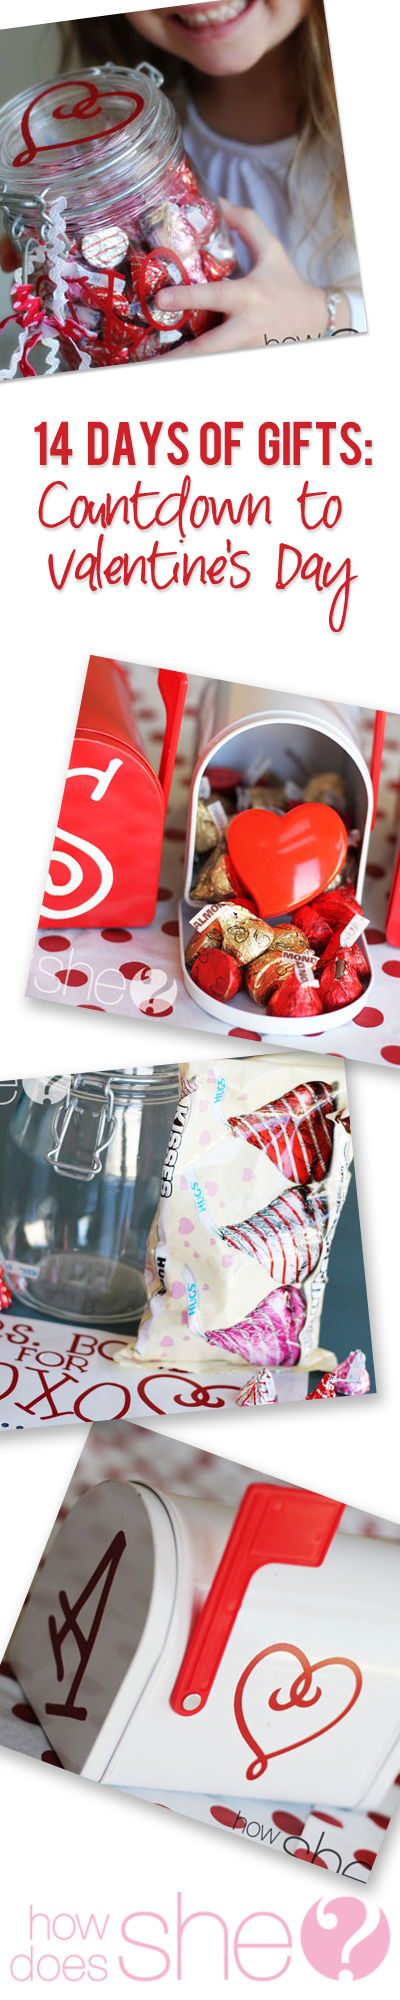 14 days of gifts countdown to Valentines Day